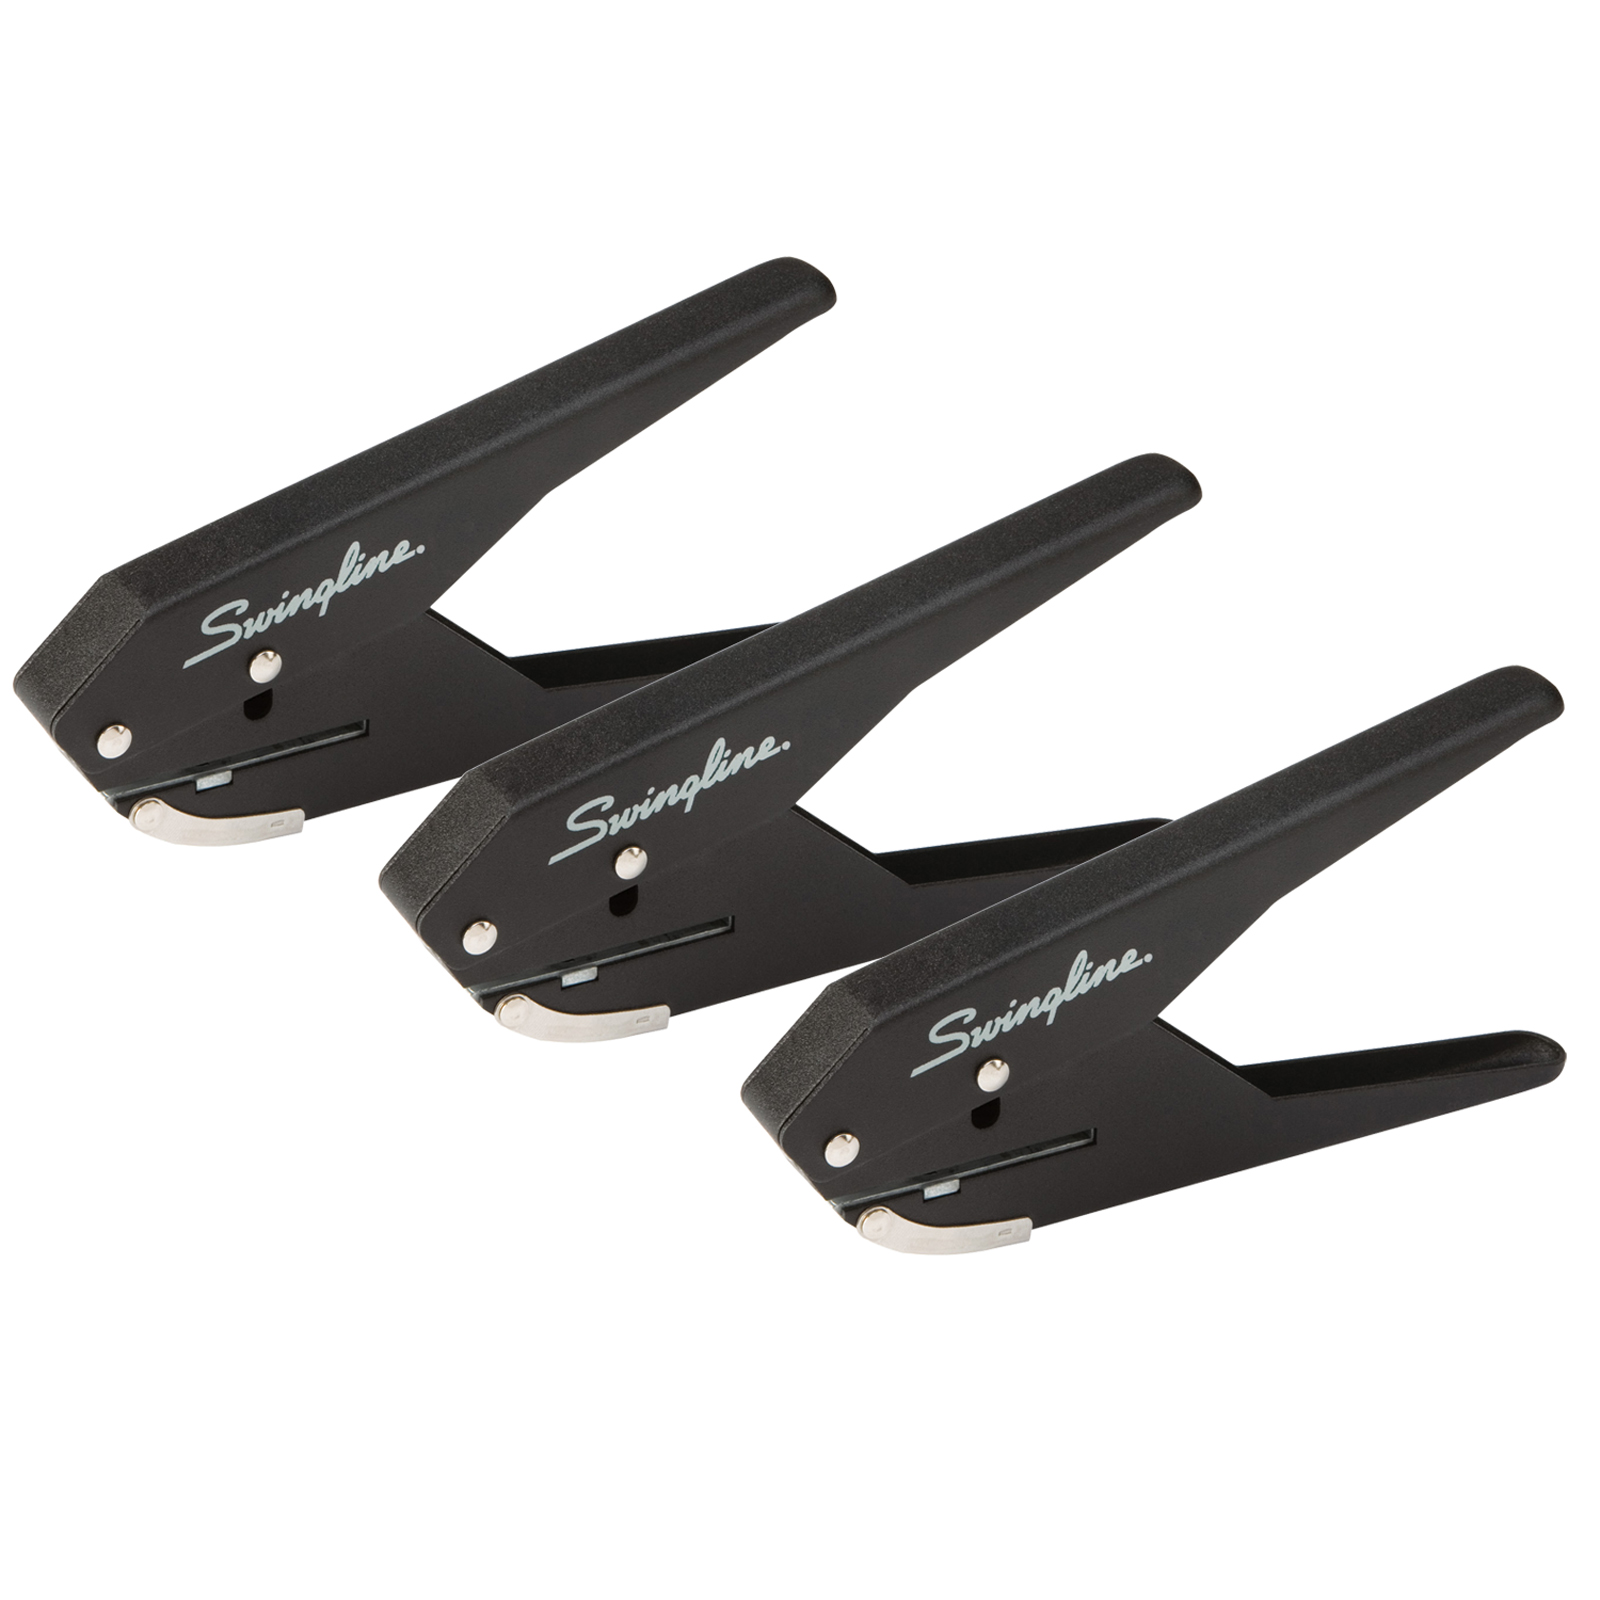 Low Force 1-Hole Punch, Pack of 3